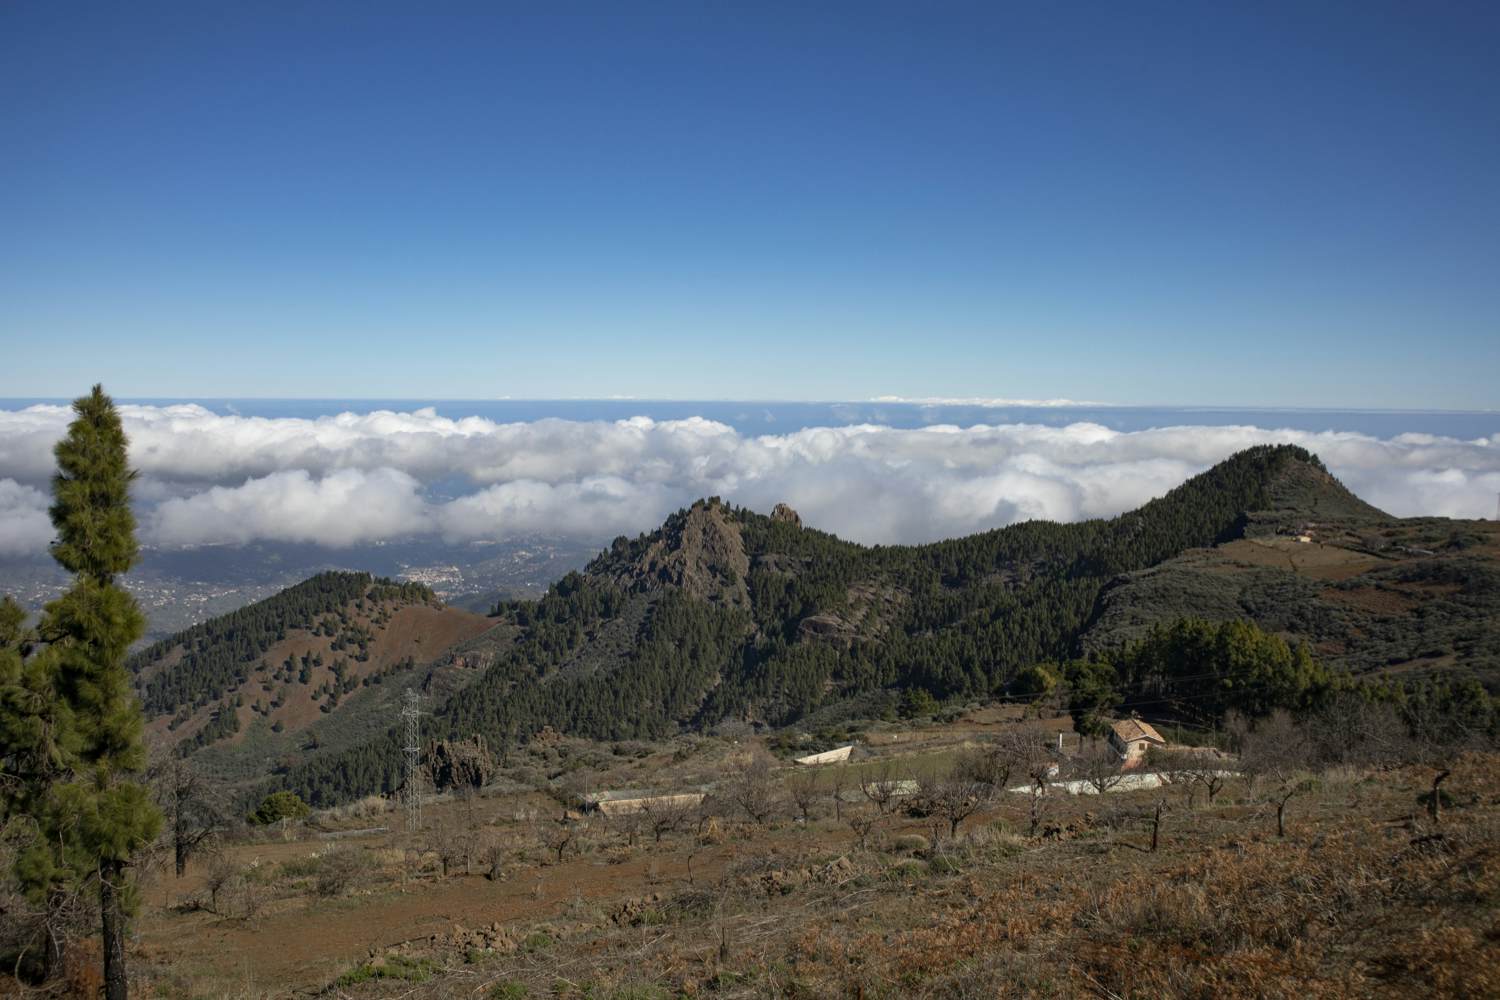 View over the mountain ranges and the clouds from the Becerra hiking trail